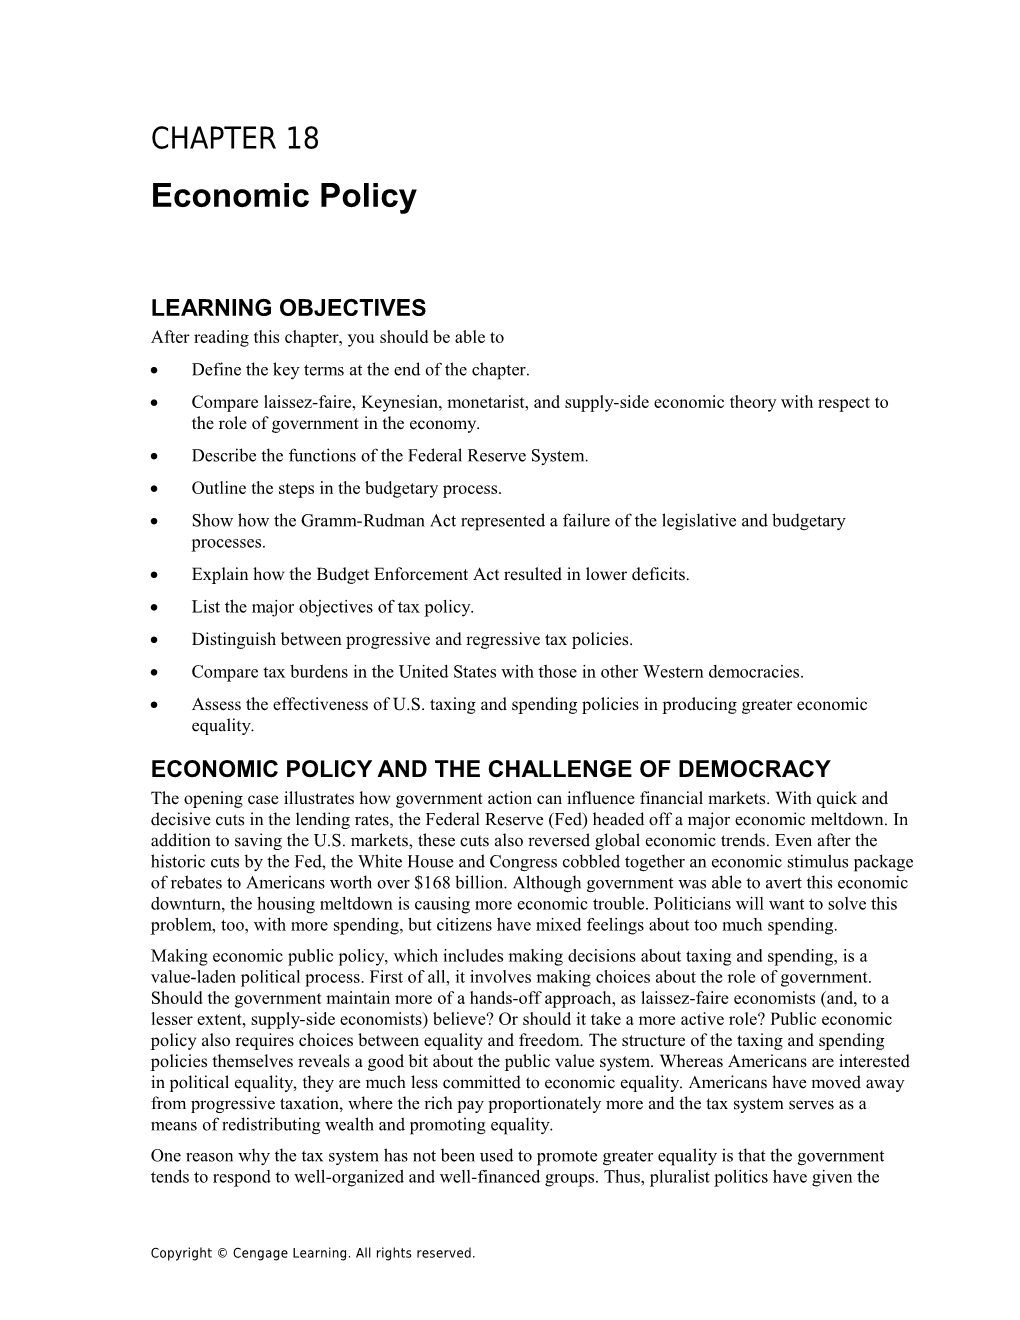 Chapter 18: Economic Policy 1